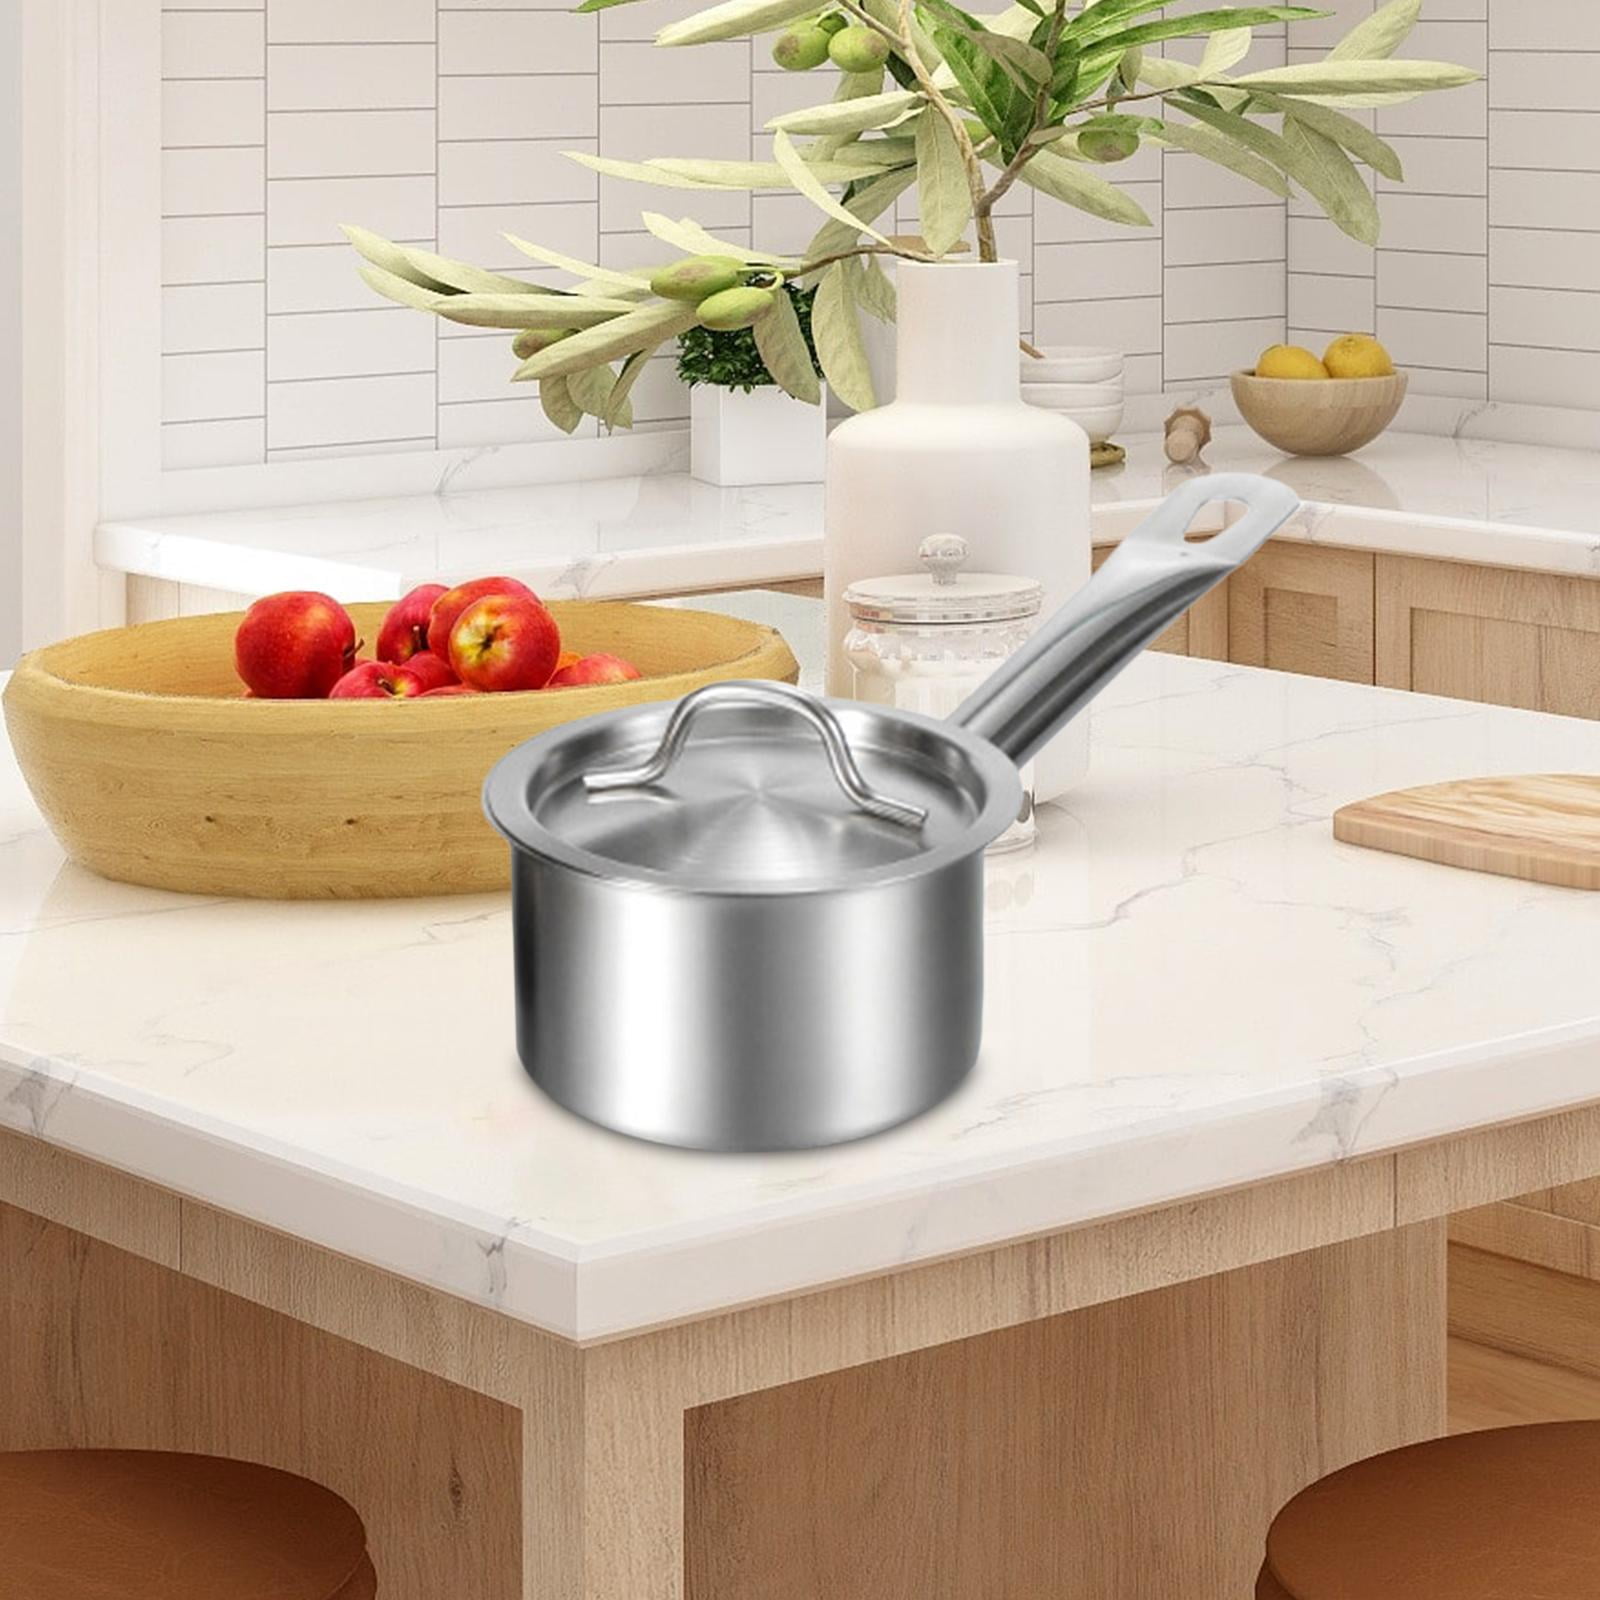 18cm Milk Pot Stainless Steel 304 Korean Cooking Pot with Handle Pot Sauce  for Hot Food - China 304 Stainless Steel and Home price